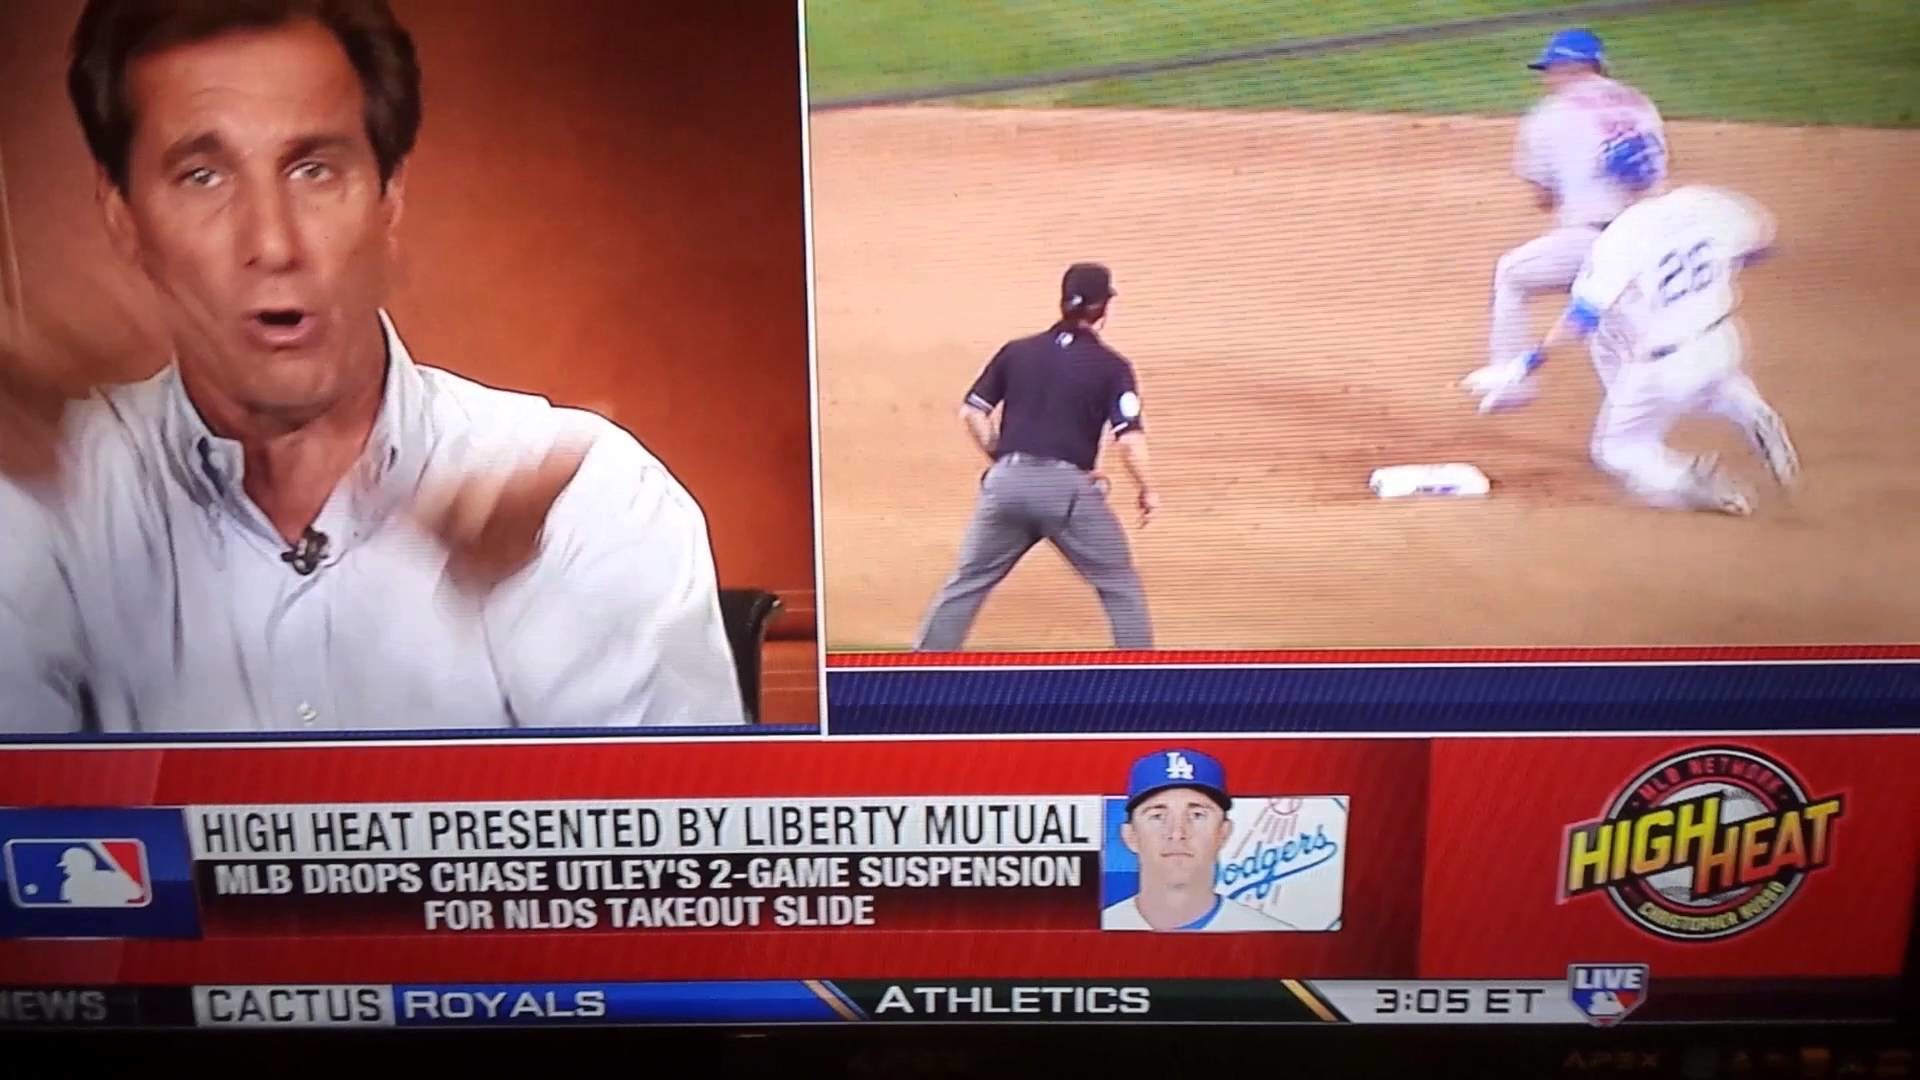 1920x1080 Chris Russo goes completely nuts on Joe Torre about dropping the Utley  suspension!